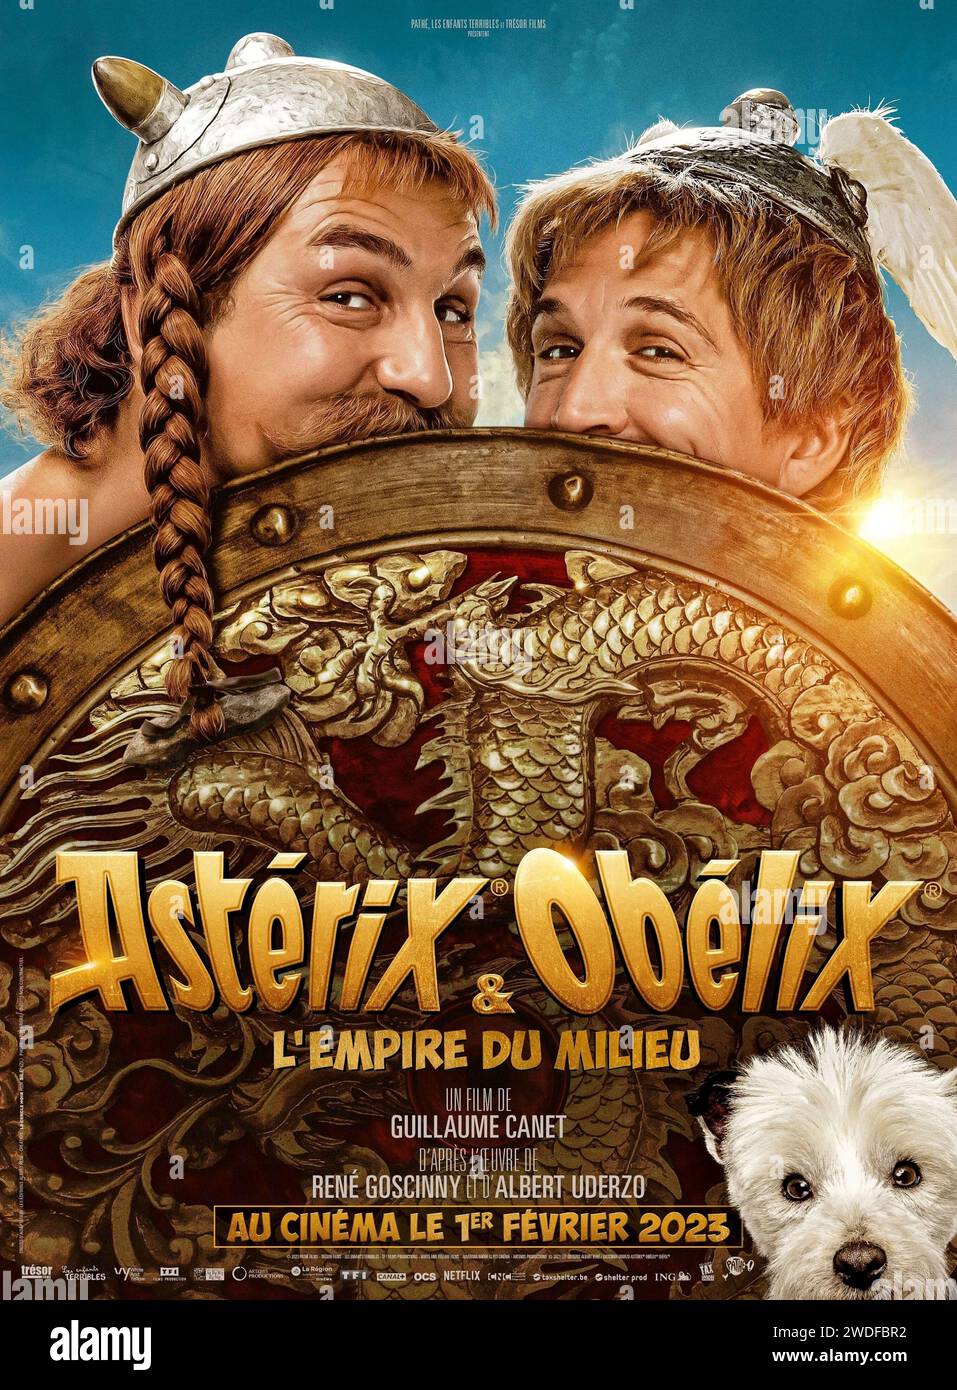 Asterix & Obelix: The Middle Kingdom (2023) directed by Guillaume Canet and starring Guillaume Canet, Gilles Lellouche and Vincent Cassel. The only daughter of the Chinese emperor Han Xuandi, escapes from a strict prince and seeks help from the Gauls and the two brave warriors Asterix and Obelix. French poster ***EDITORIAL USE ONLY***. Credit: BFA / Pathé Stock Photo